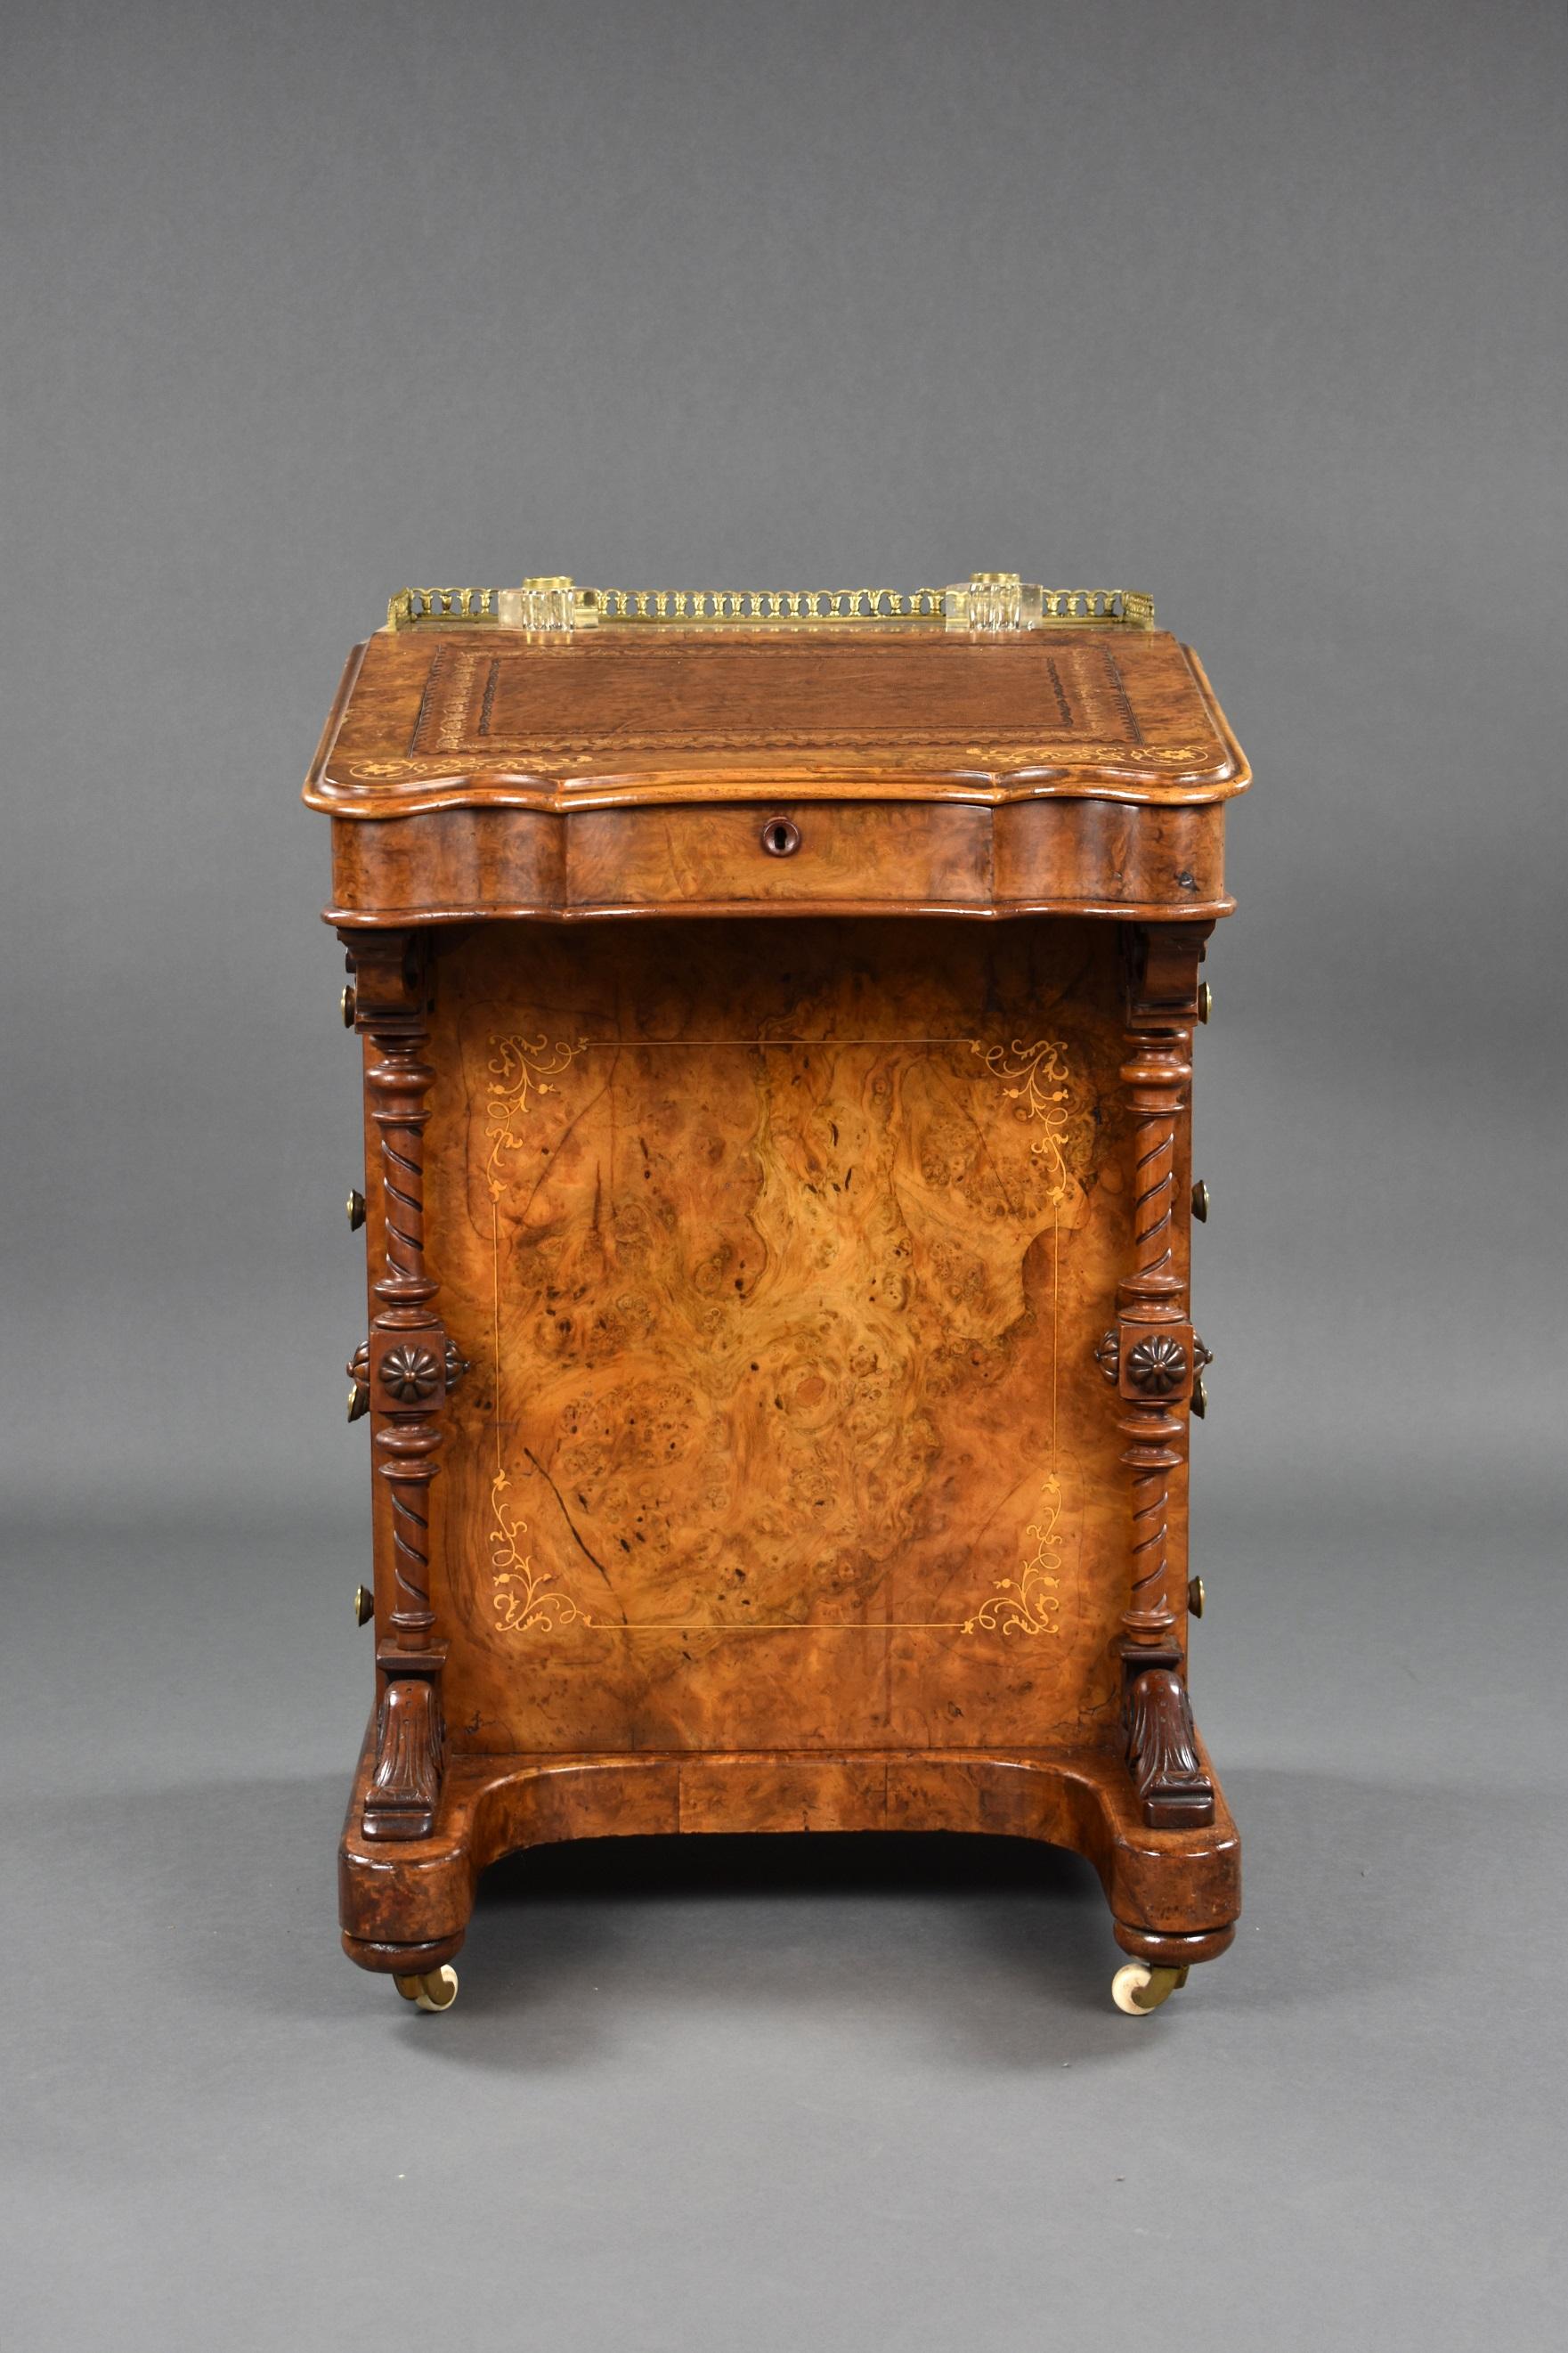 Victorian burr walnut and inlaid davenport in nice condition. It has a brass gallery to the top with an an ink well either side with decorative inlay surrounding each. The top has a tan leather insert with gold tooling to the edge, the top lifts up